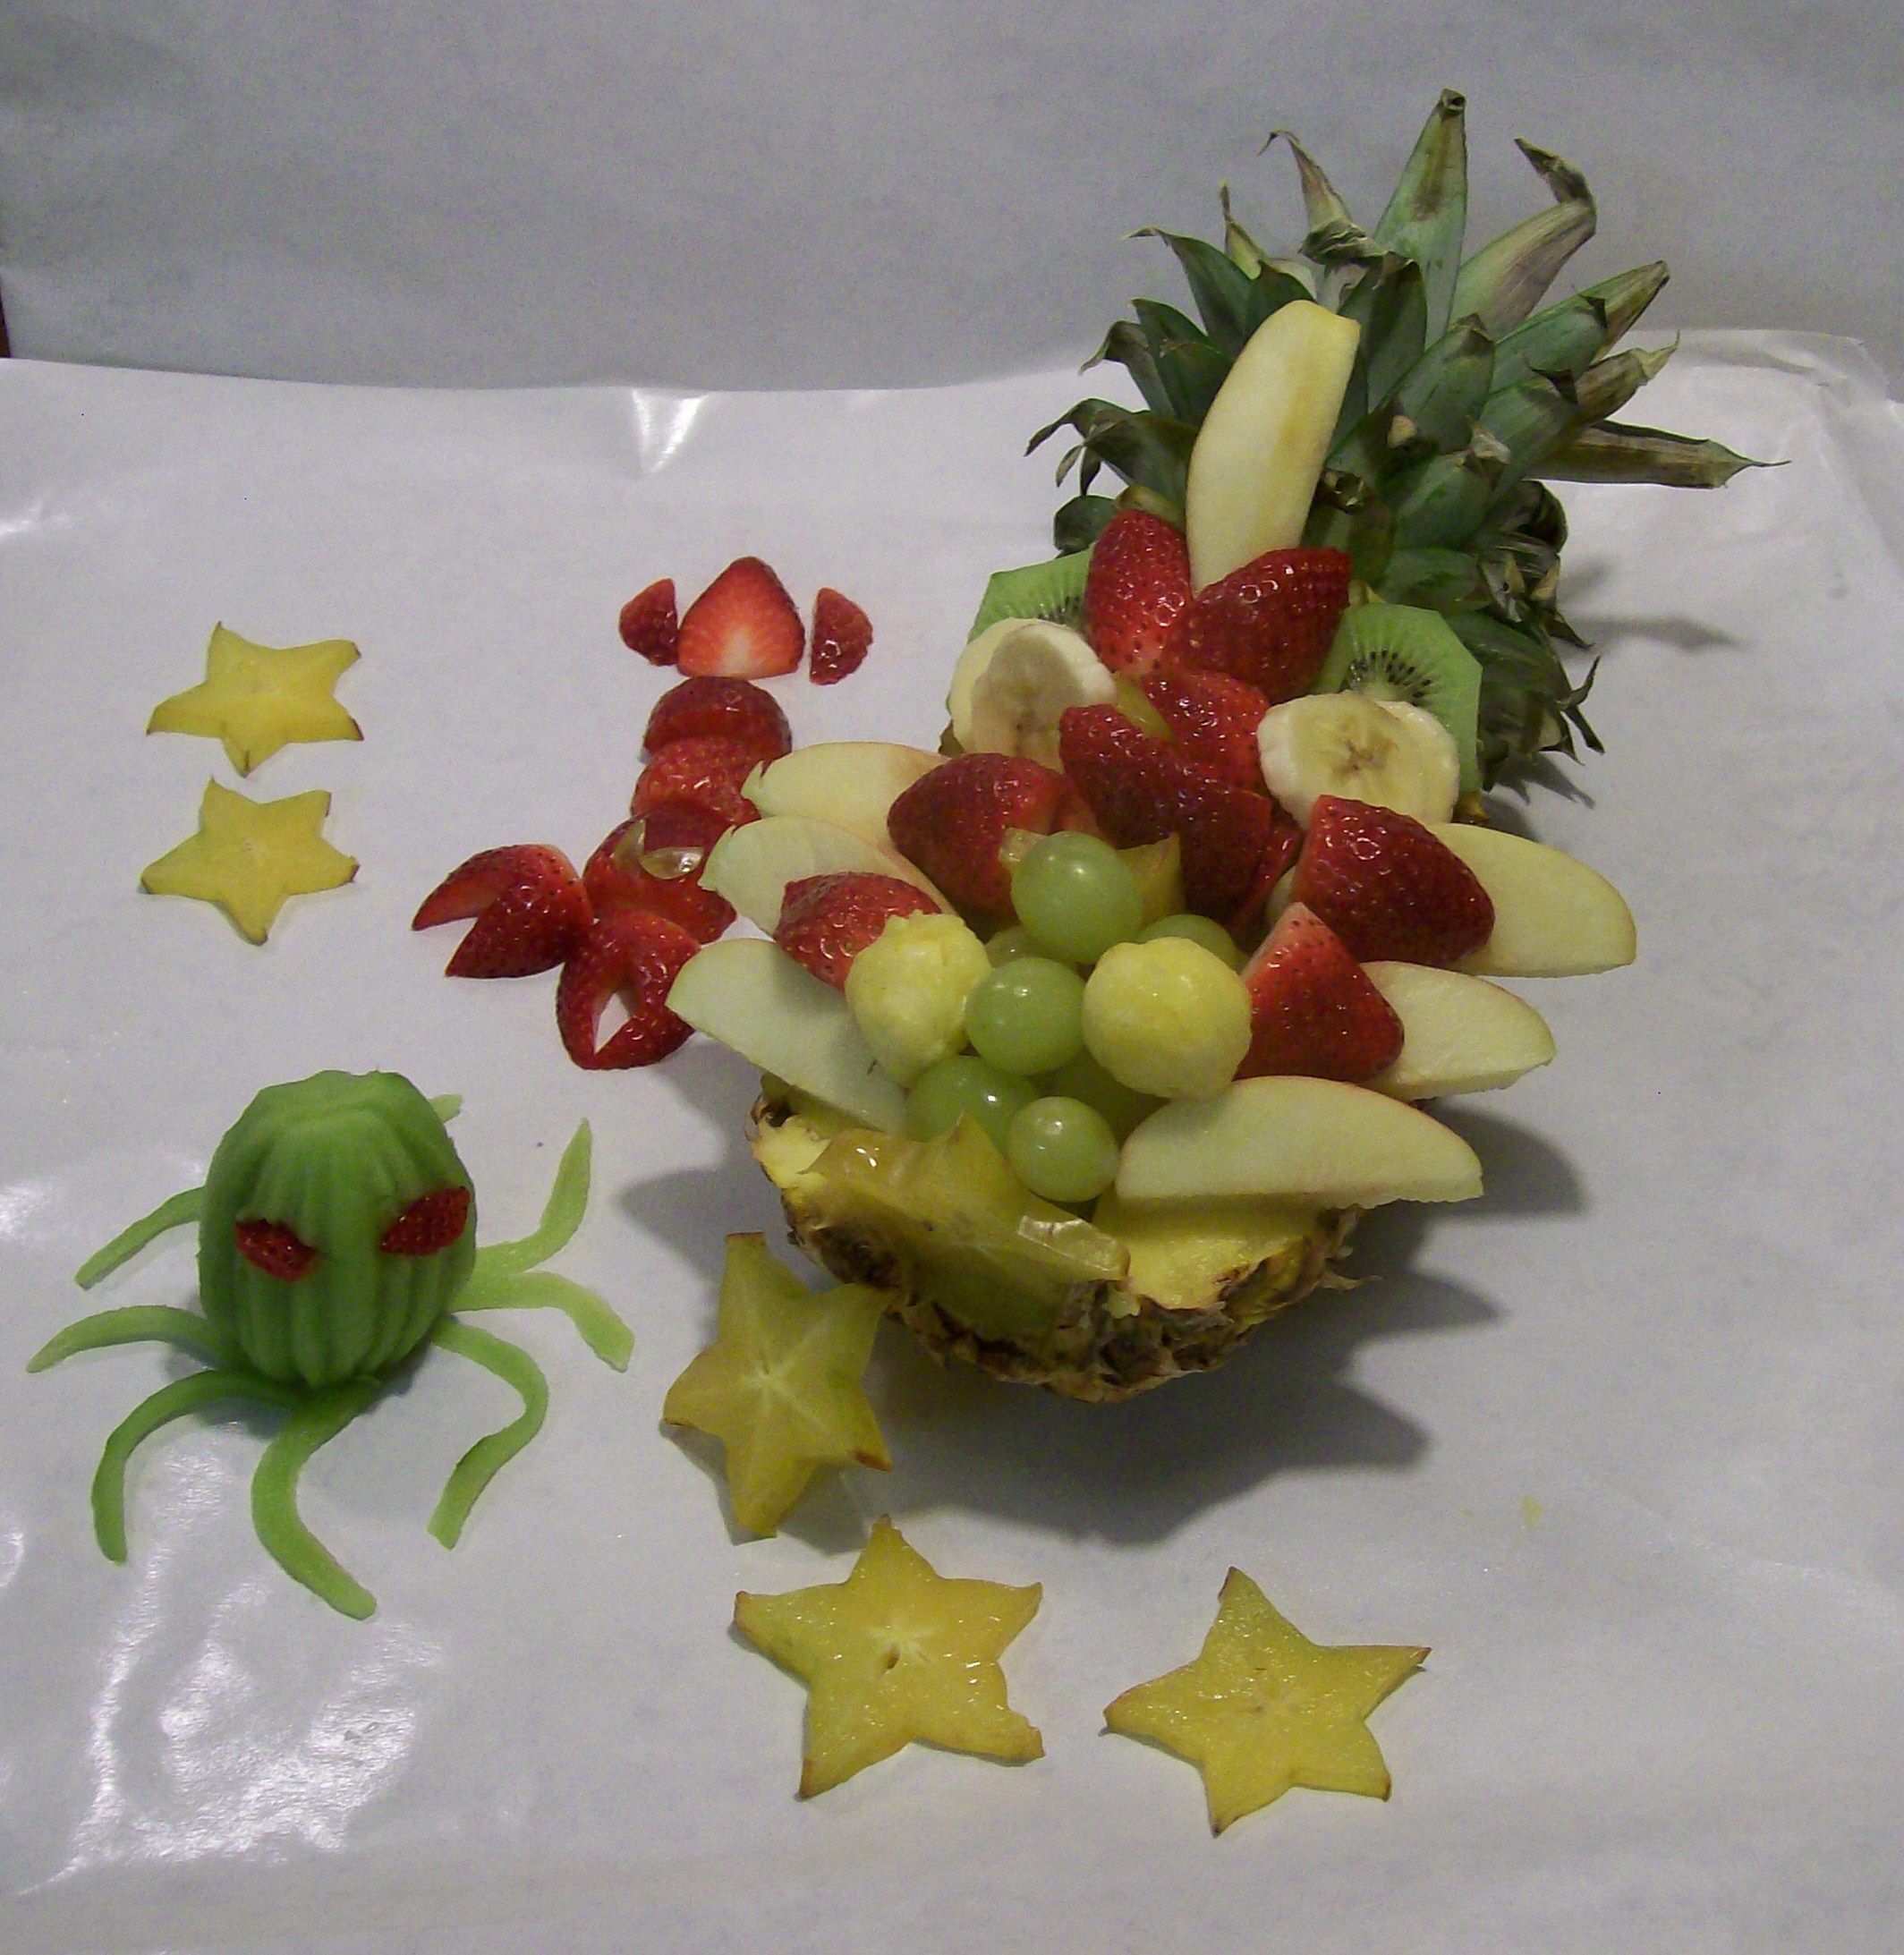 Healthy Game Night Recipe of Pineapple Boats